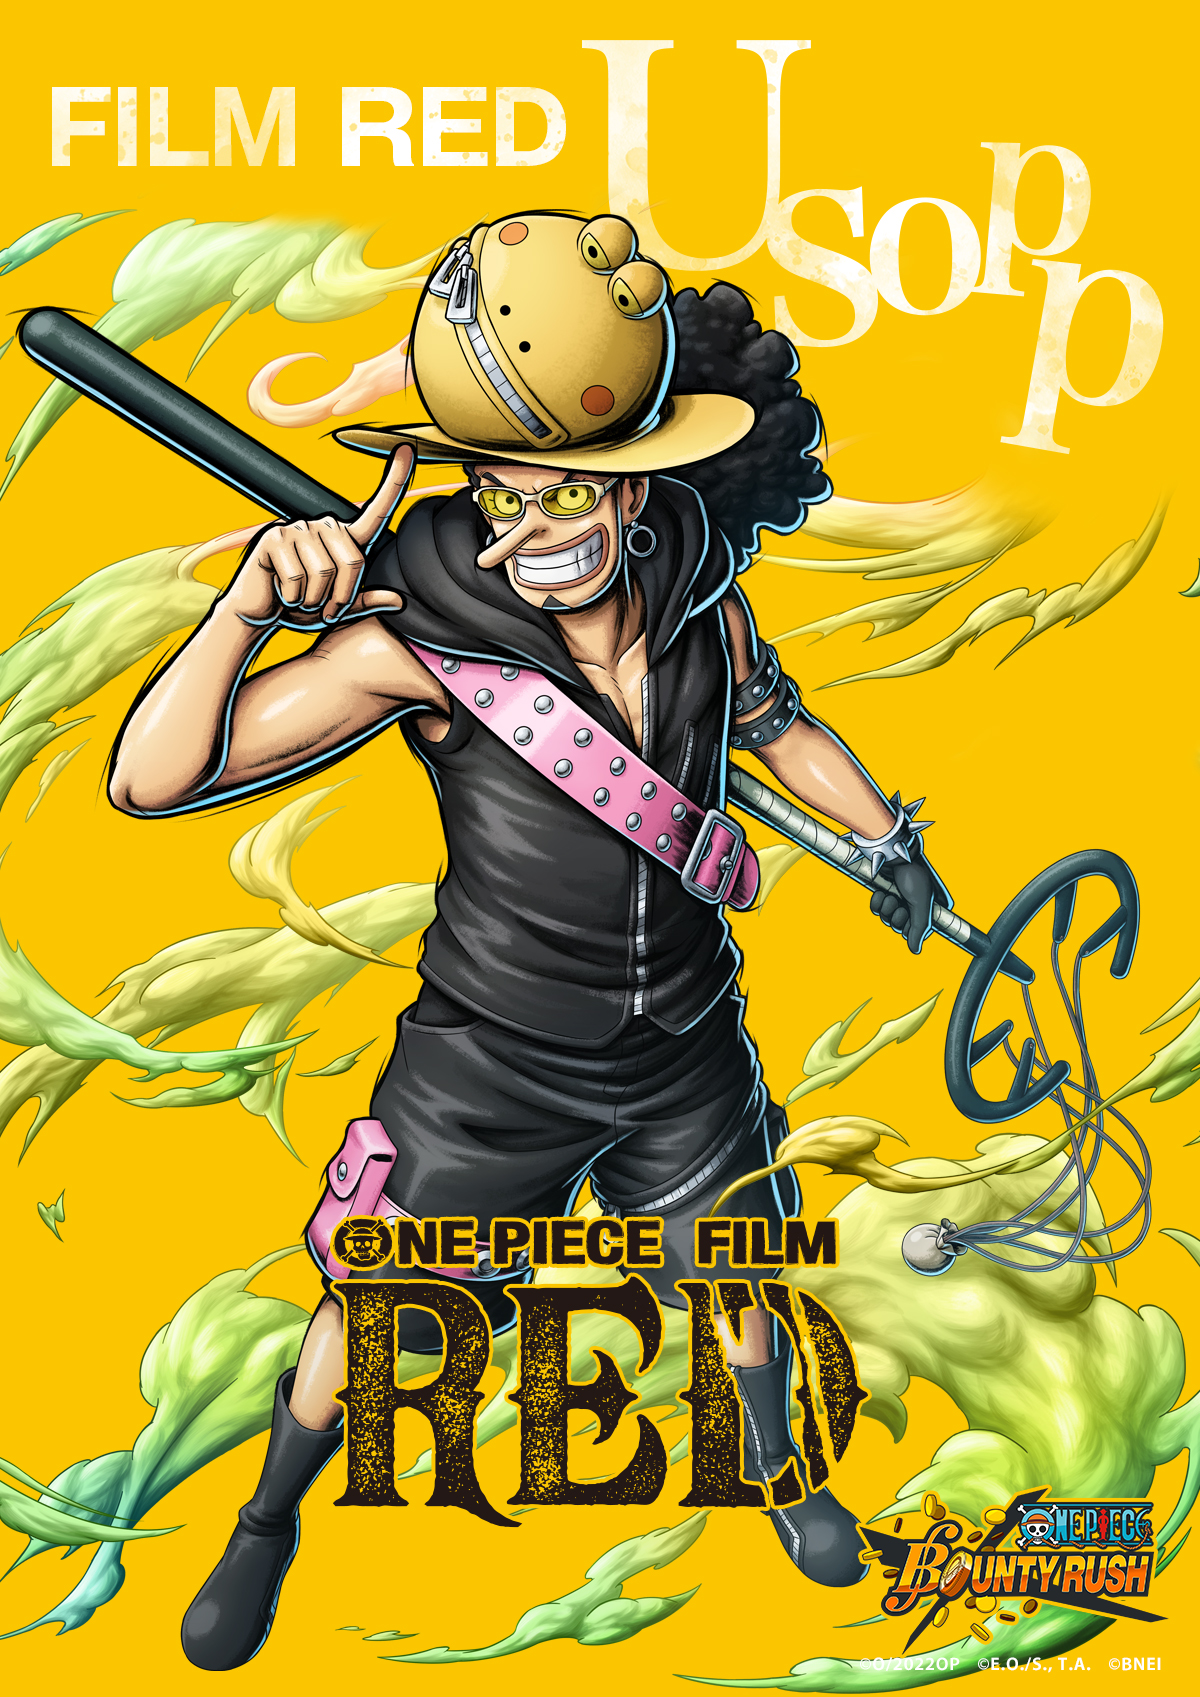 ONE PIECE Bounty Rush - 【Notice】 FILM RED Usopp joins the battle! #BountyRush #ONEPIECE #OP_FILMRED